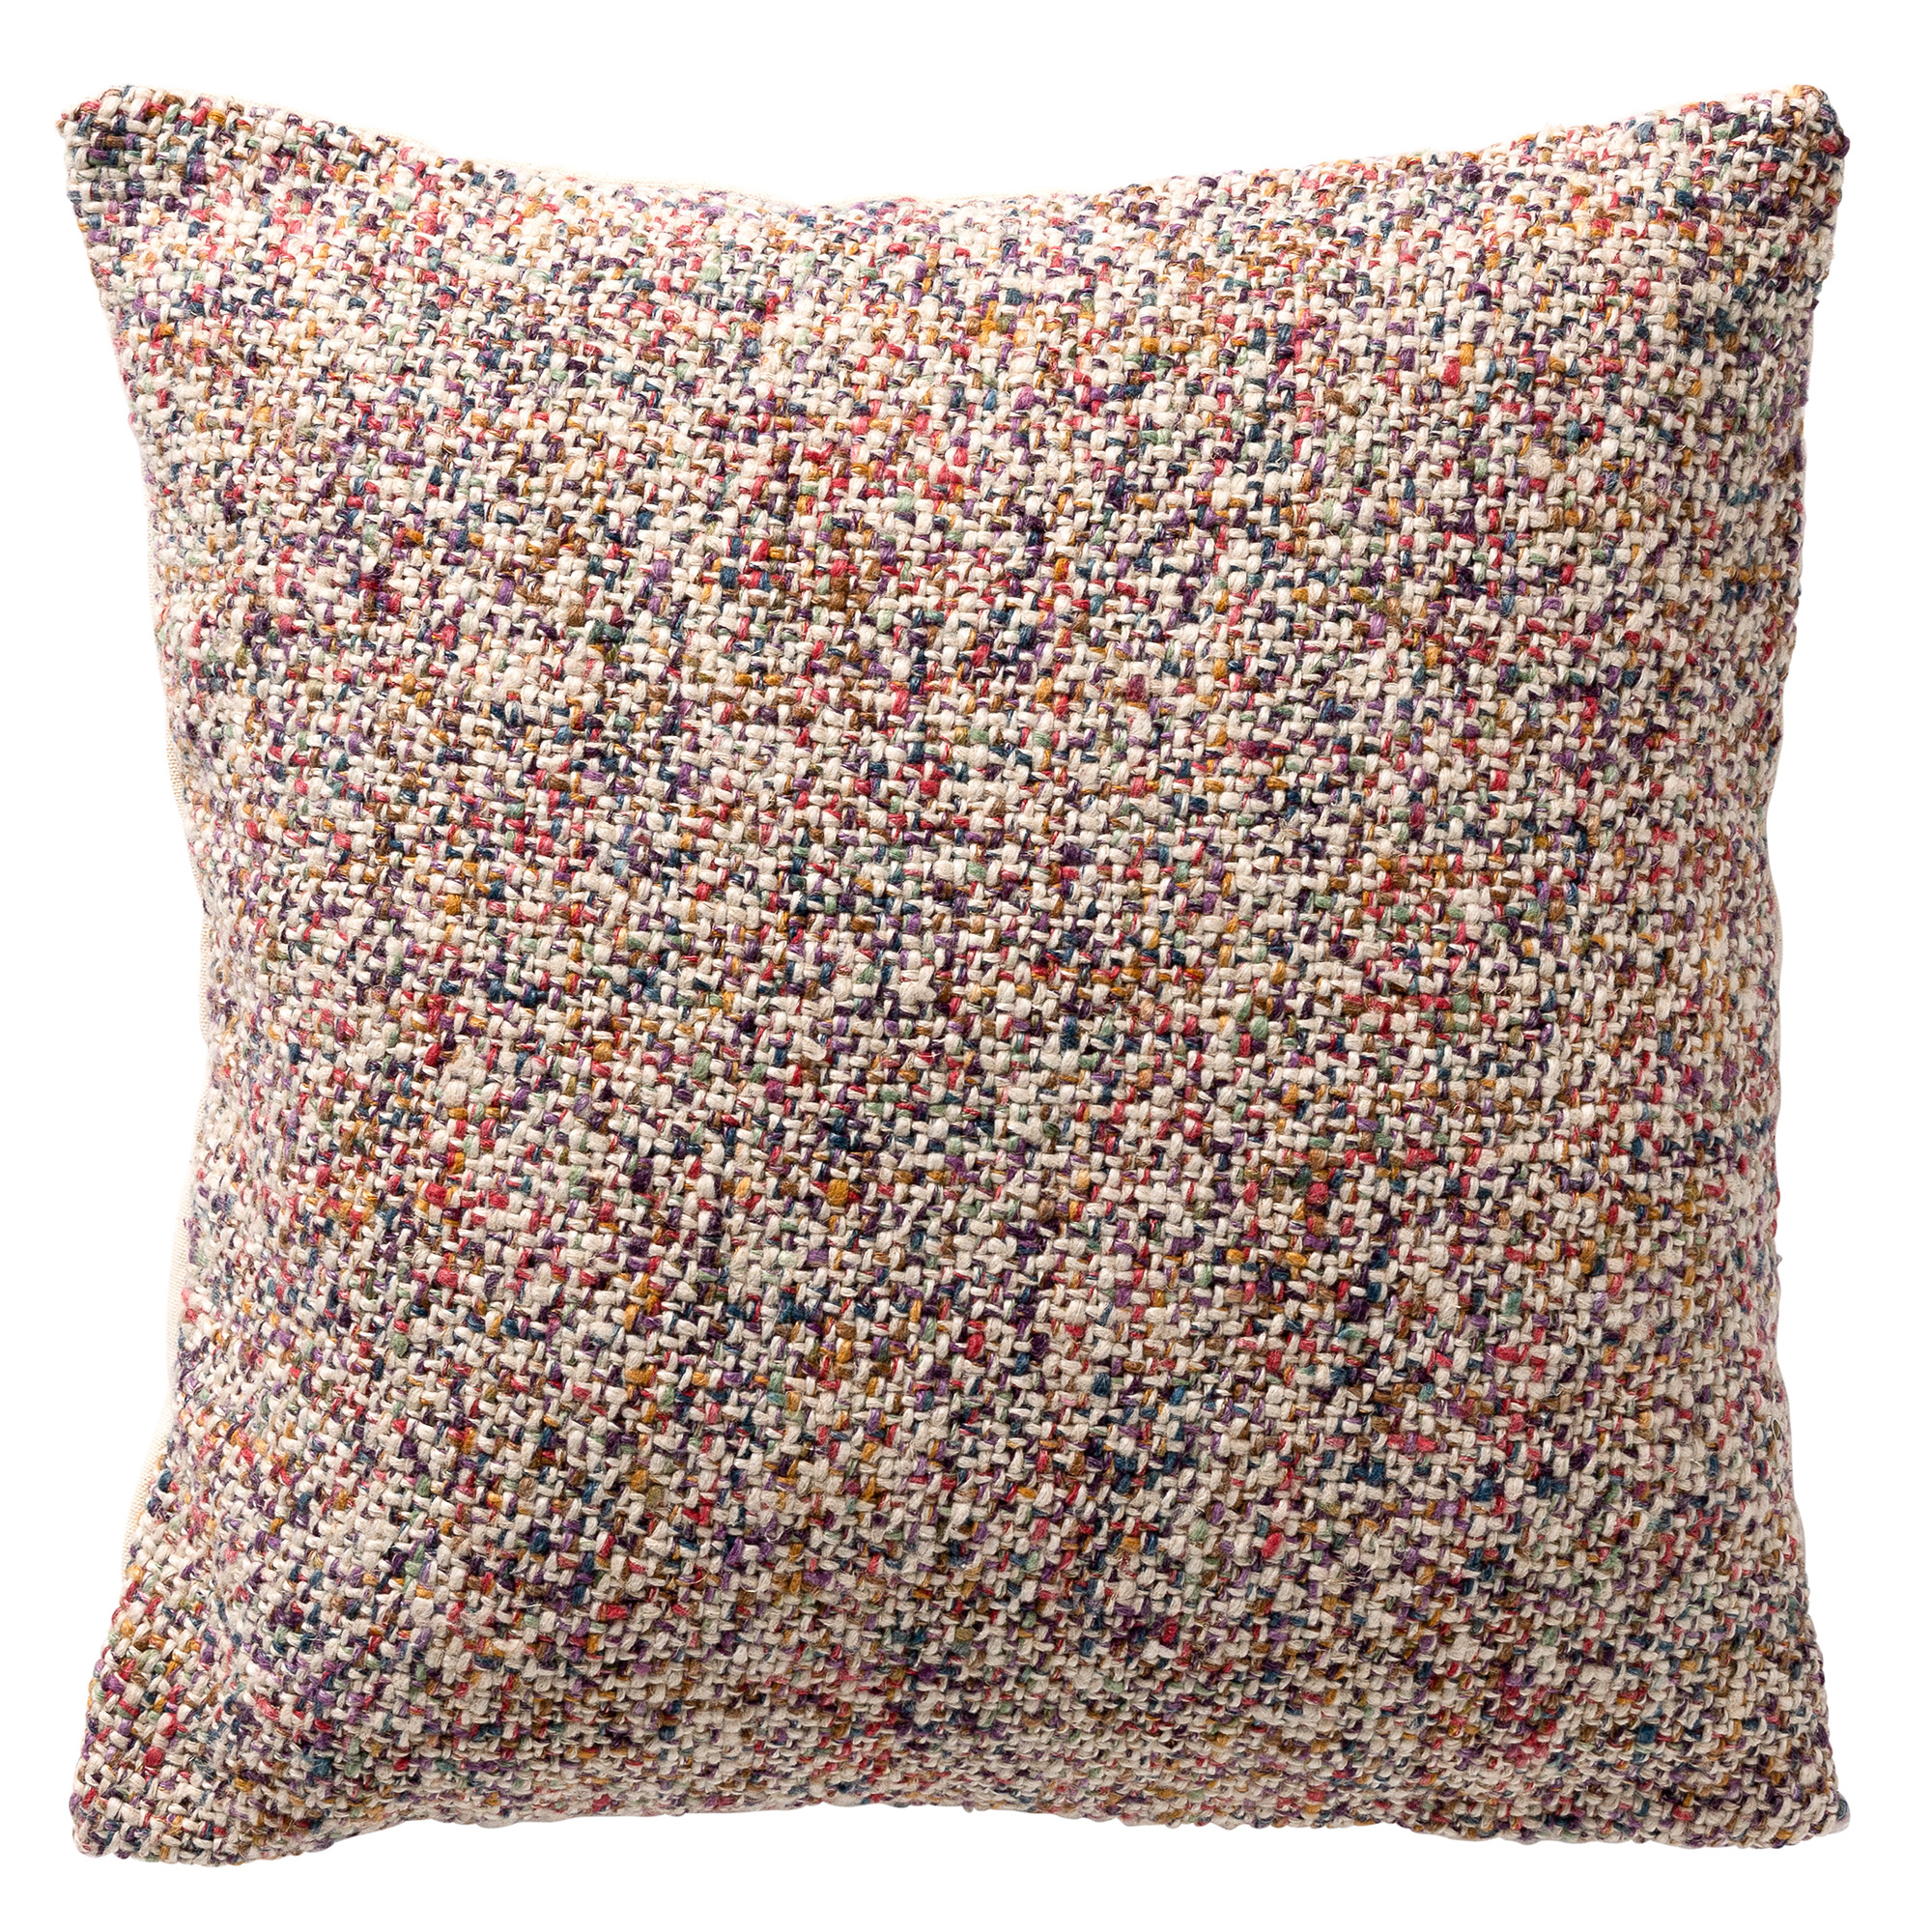 JOEY - Cushion 45x45 cm with cushion cover made of 70% gerecycled cotton - Eco Line collection - Elderberry - multicolor